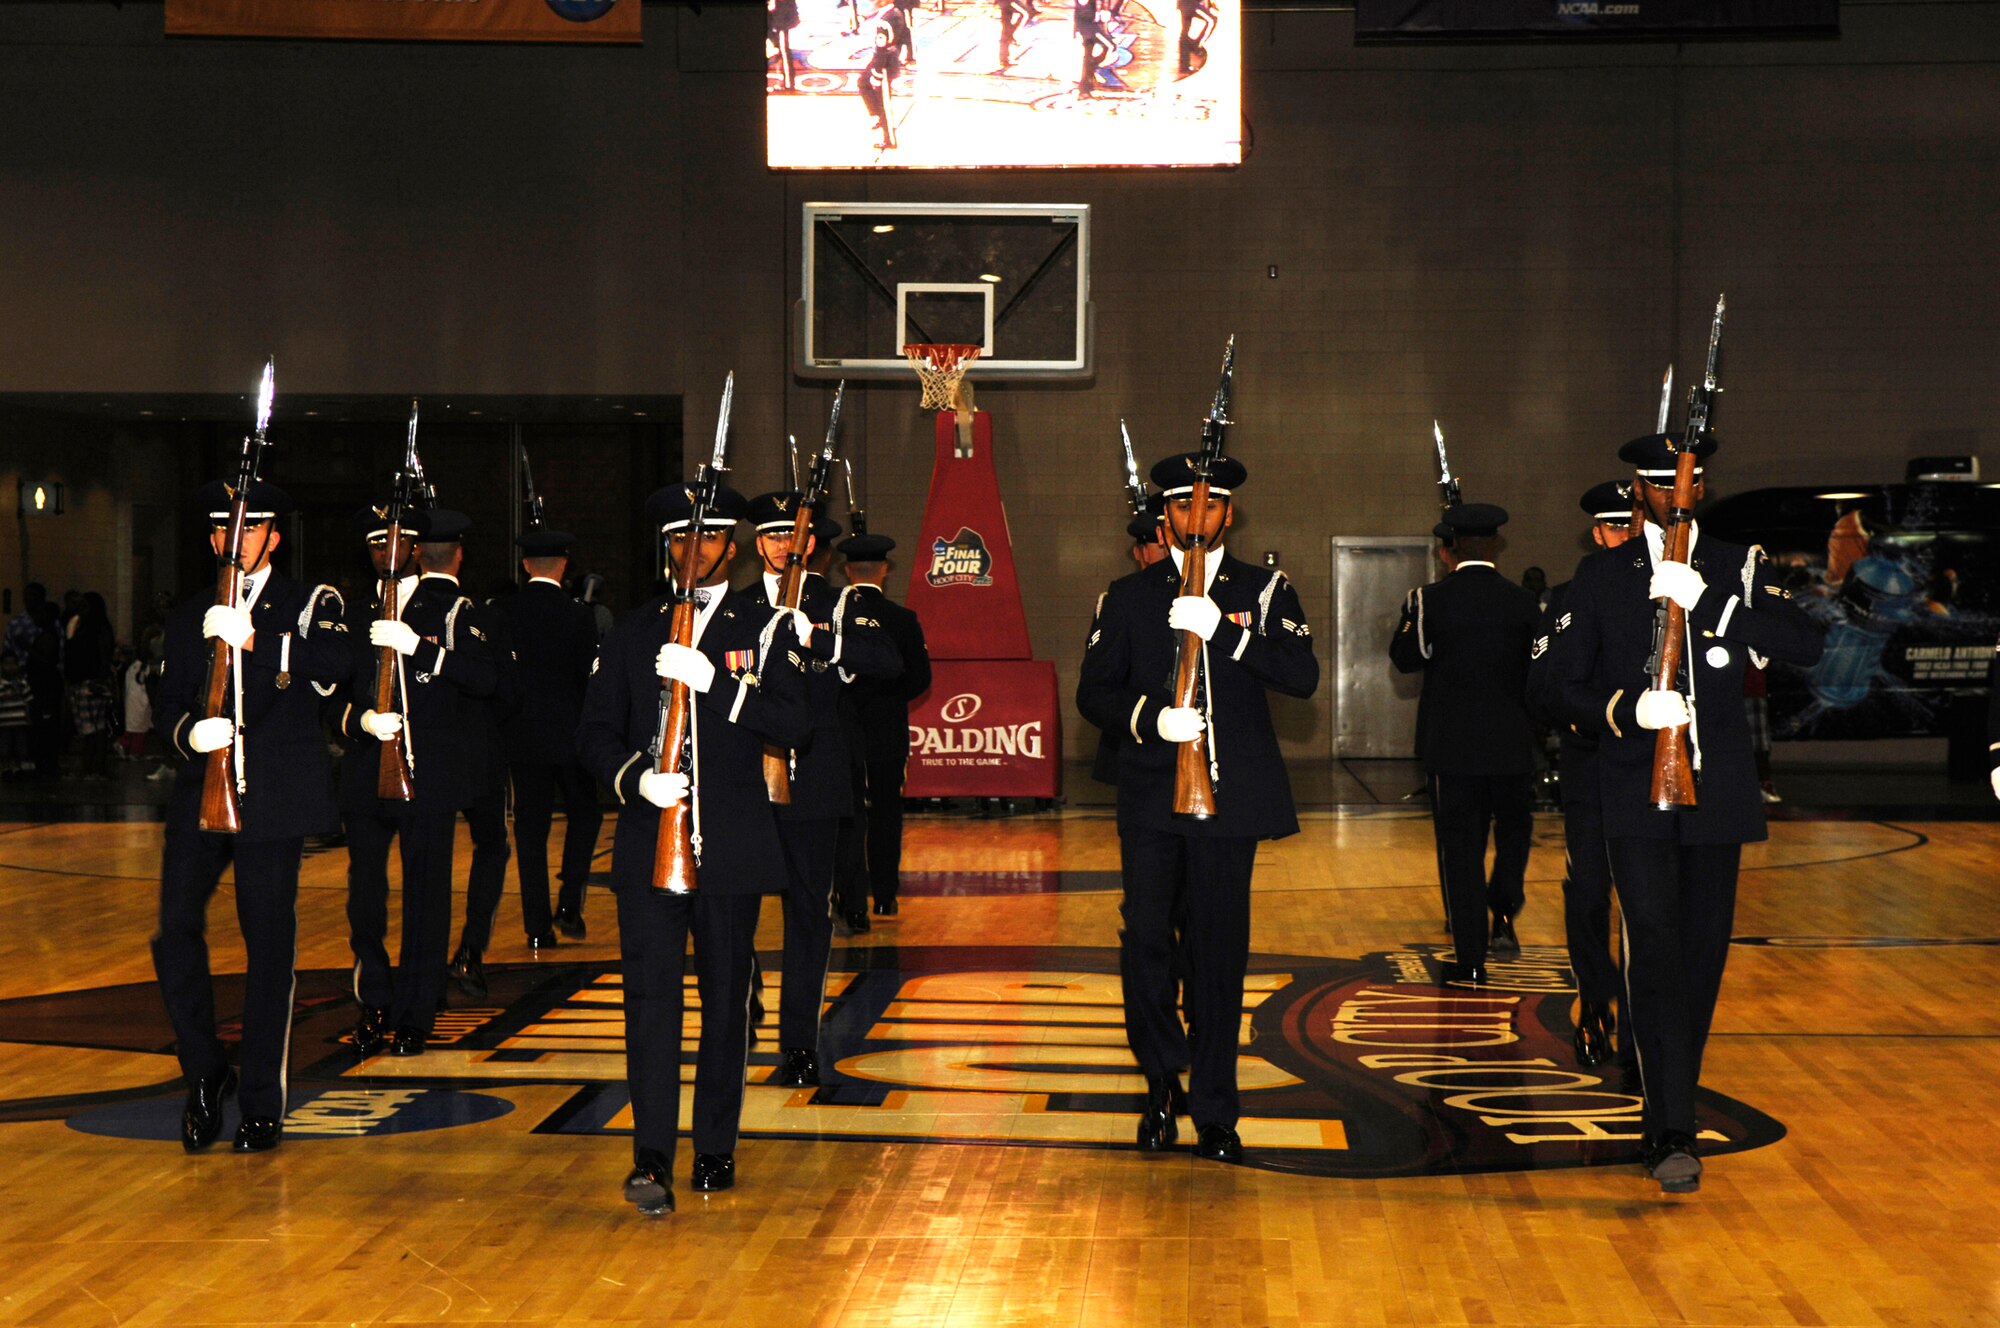 The USAF Honor Guard Drill Team enters Center Court at Hoop City during their performance before the 2008 NCAA Men's Final Four. The Drill Team is the travelling component of the Air Force Honor Guard and tours worldwide showcasing the precision of today's Air Force, to recruit, retain and inspire Airmen for the Air Force mission. (U.S. Air Force photo by SSgt Raymond Mills)